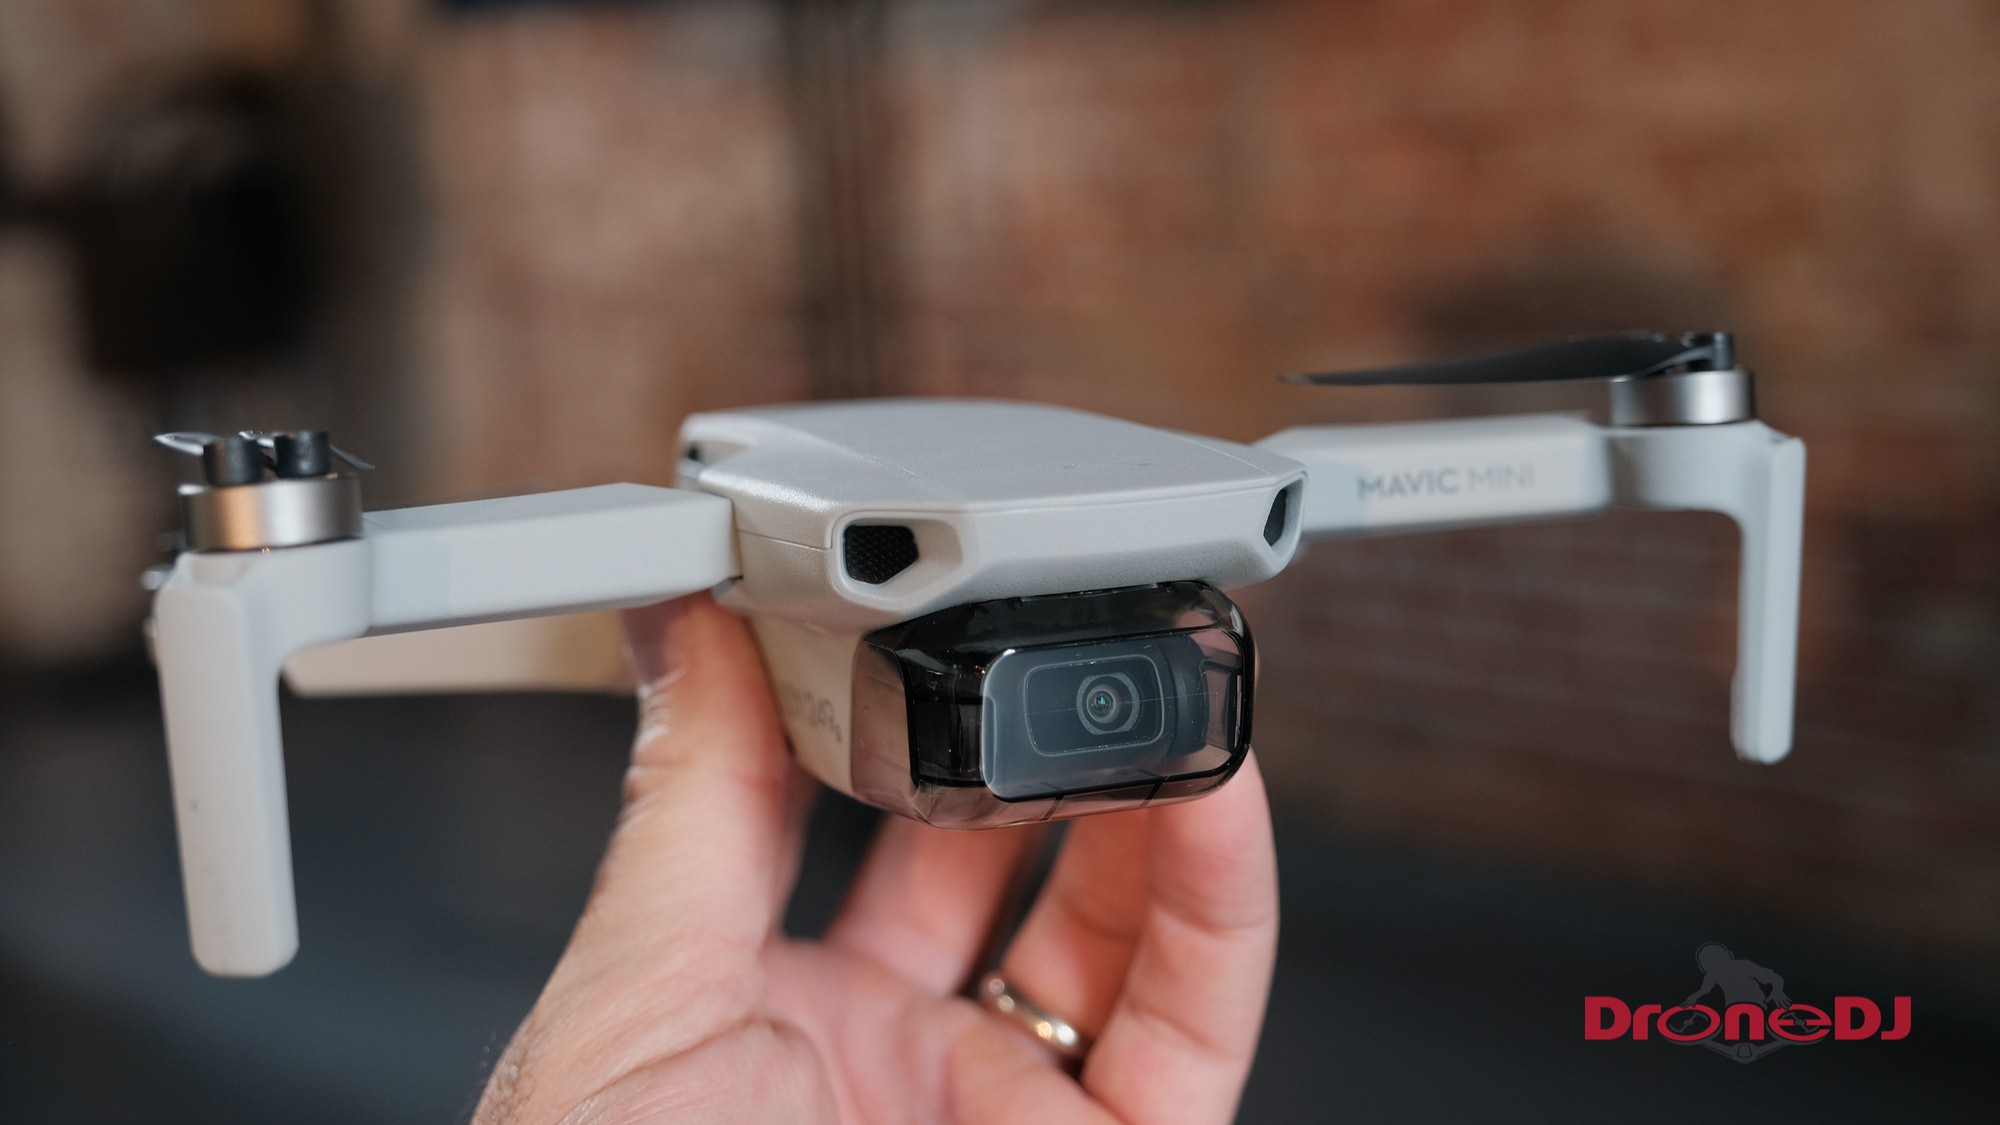 DJI Mavic Mini introduced — new $399 Ultra-Light drone weighs only